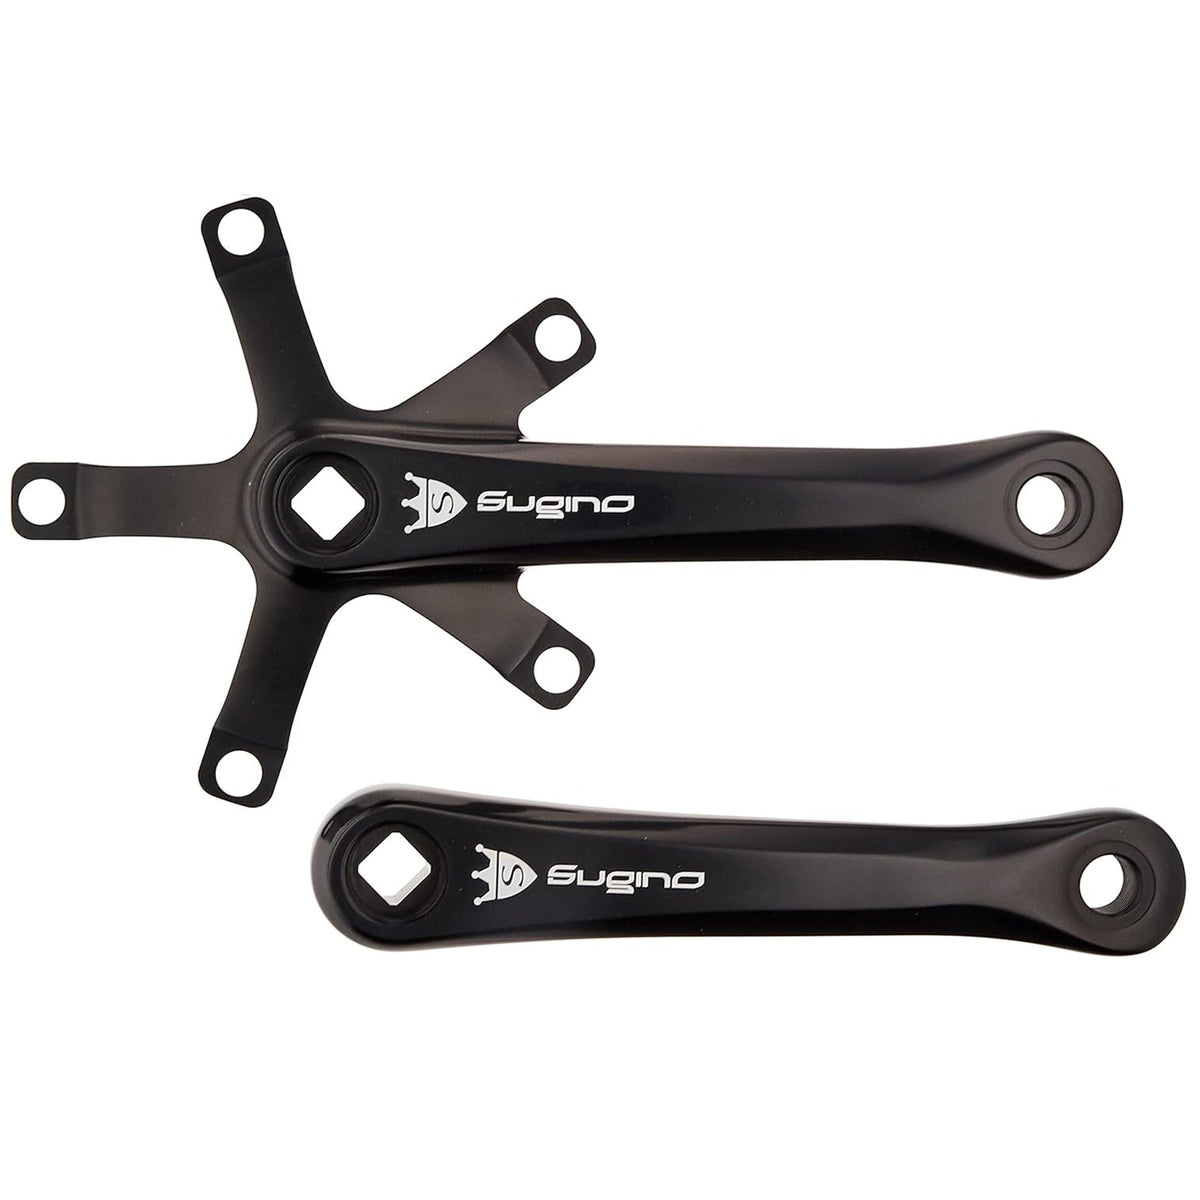 Sugino Mighty Comp fixed gear track crank arms